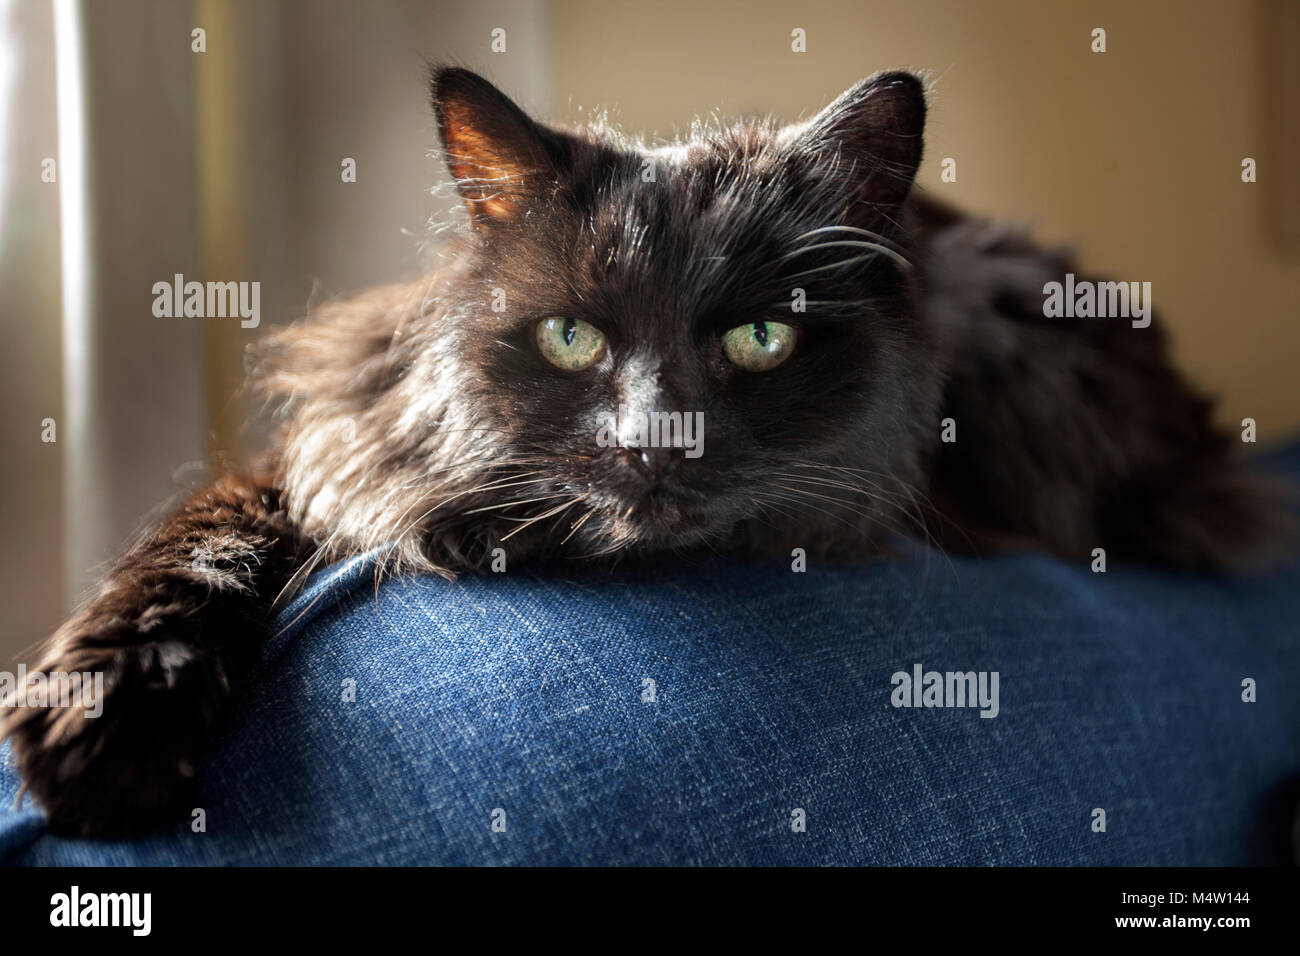 Long haired black cat lying on a the back of a blue fabric sofa. Stock Photo